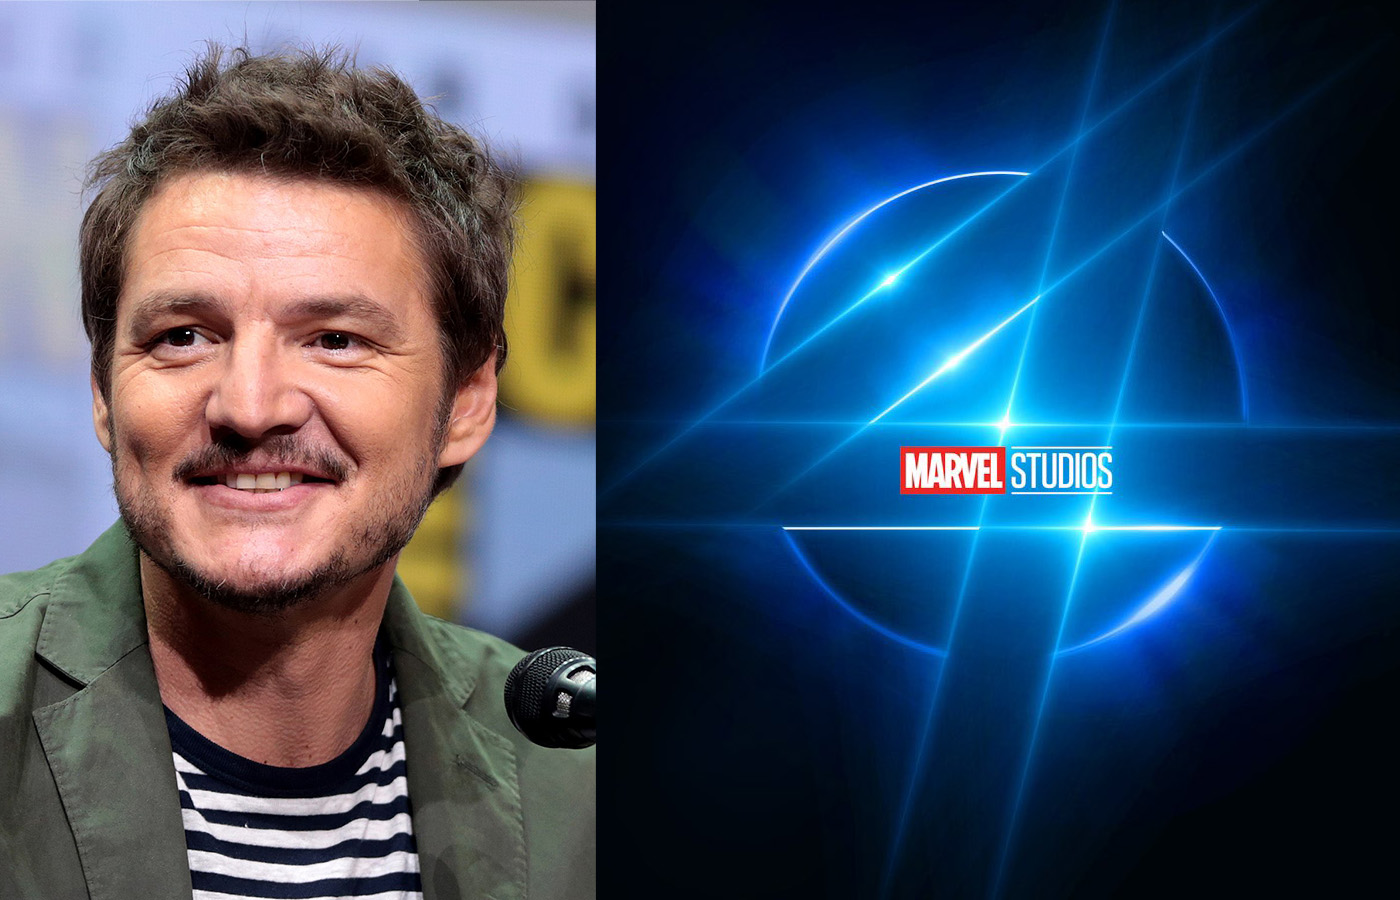 'Fantastic Four' director Matt Shakman shares post confirming Pedro Pascal will play Reed Richards